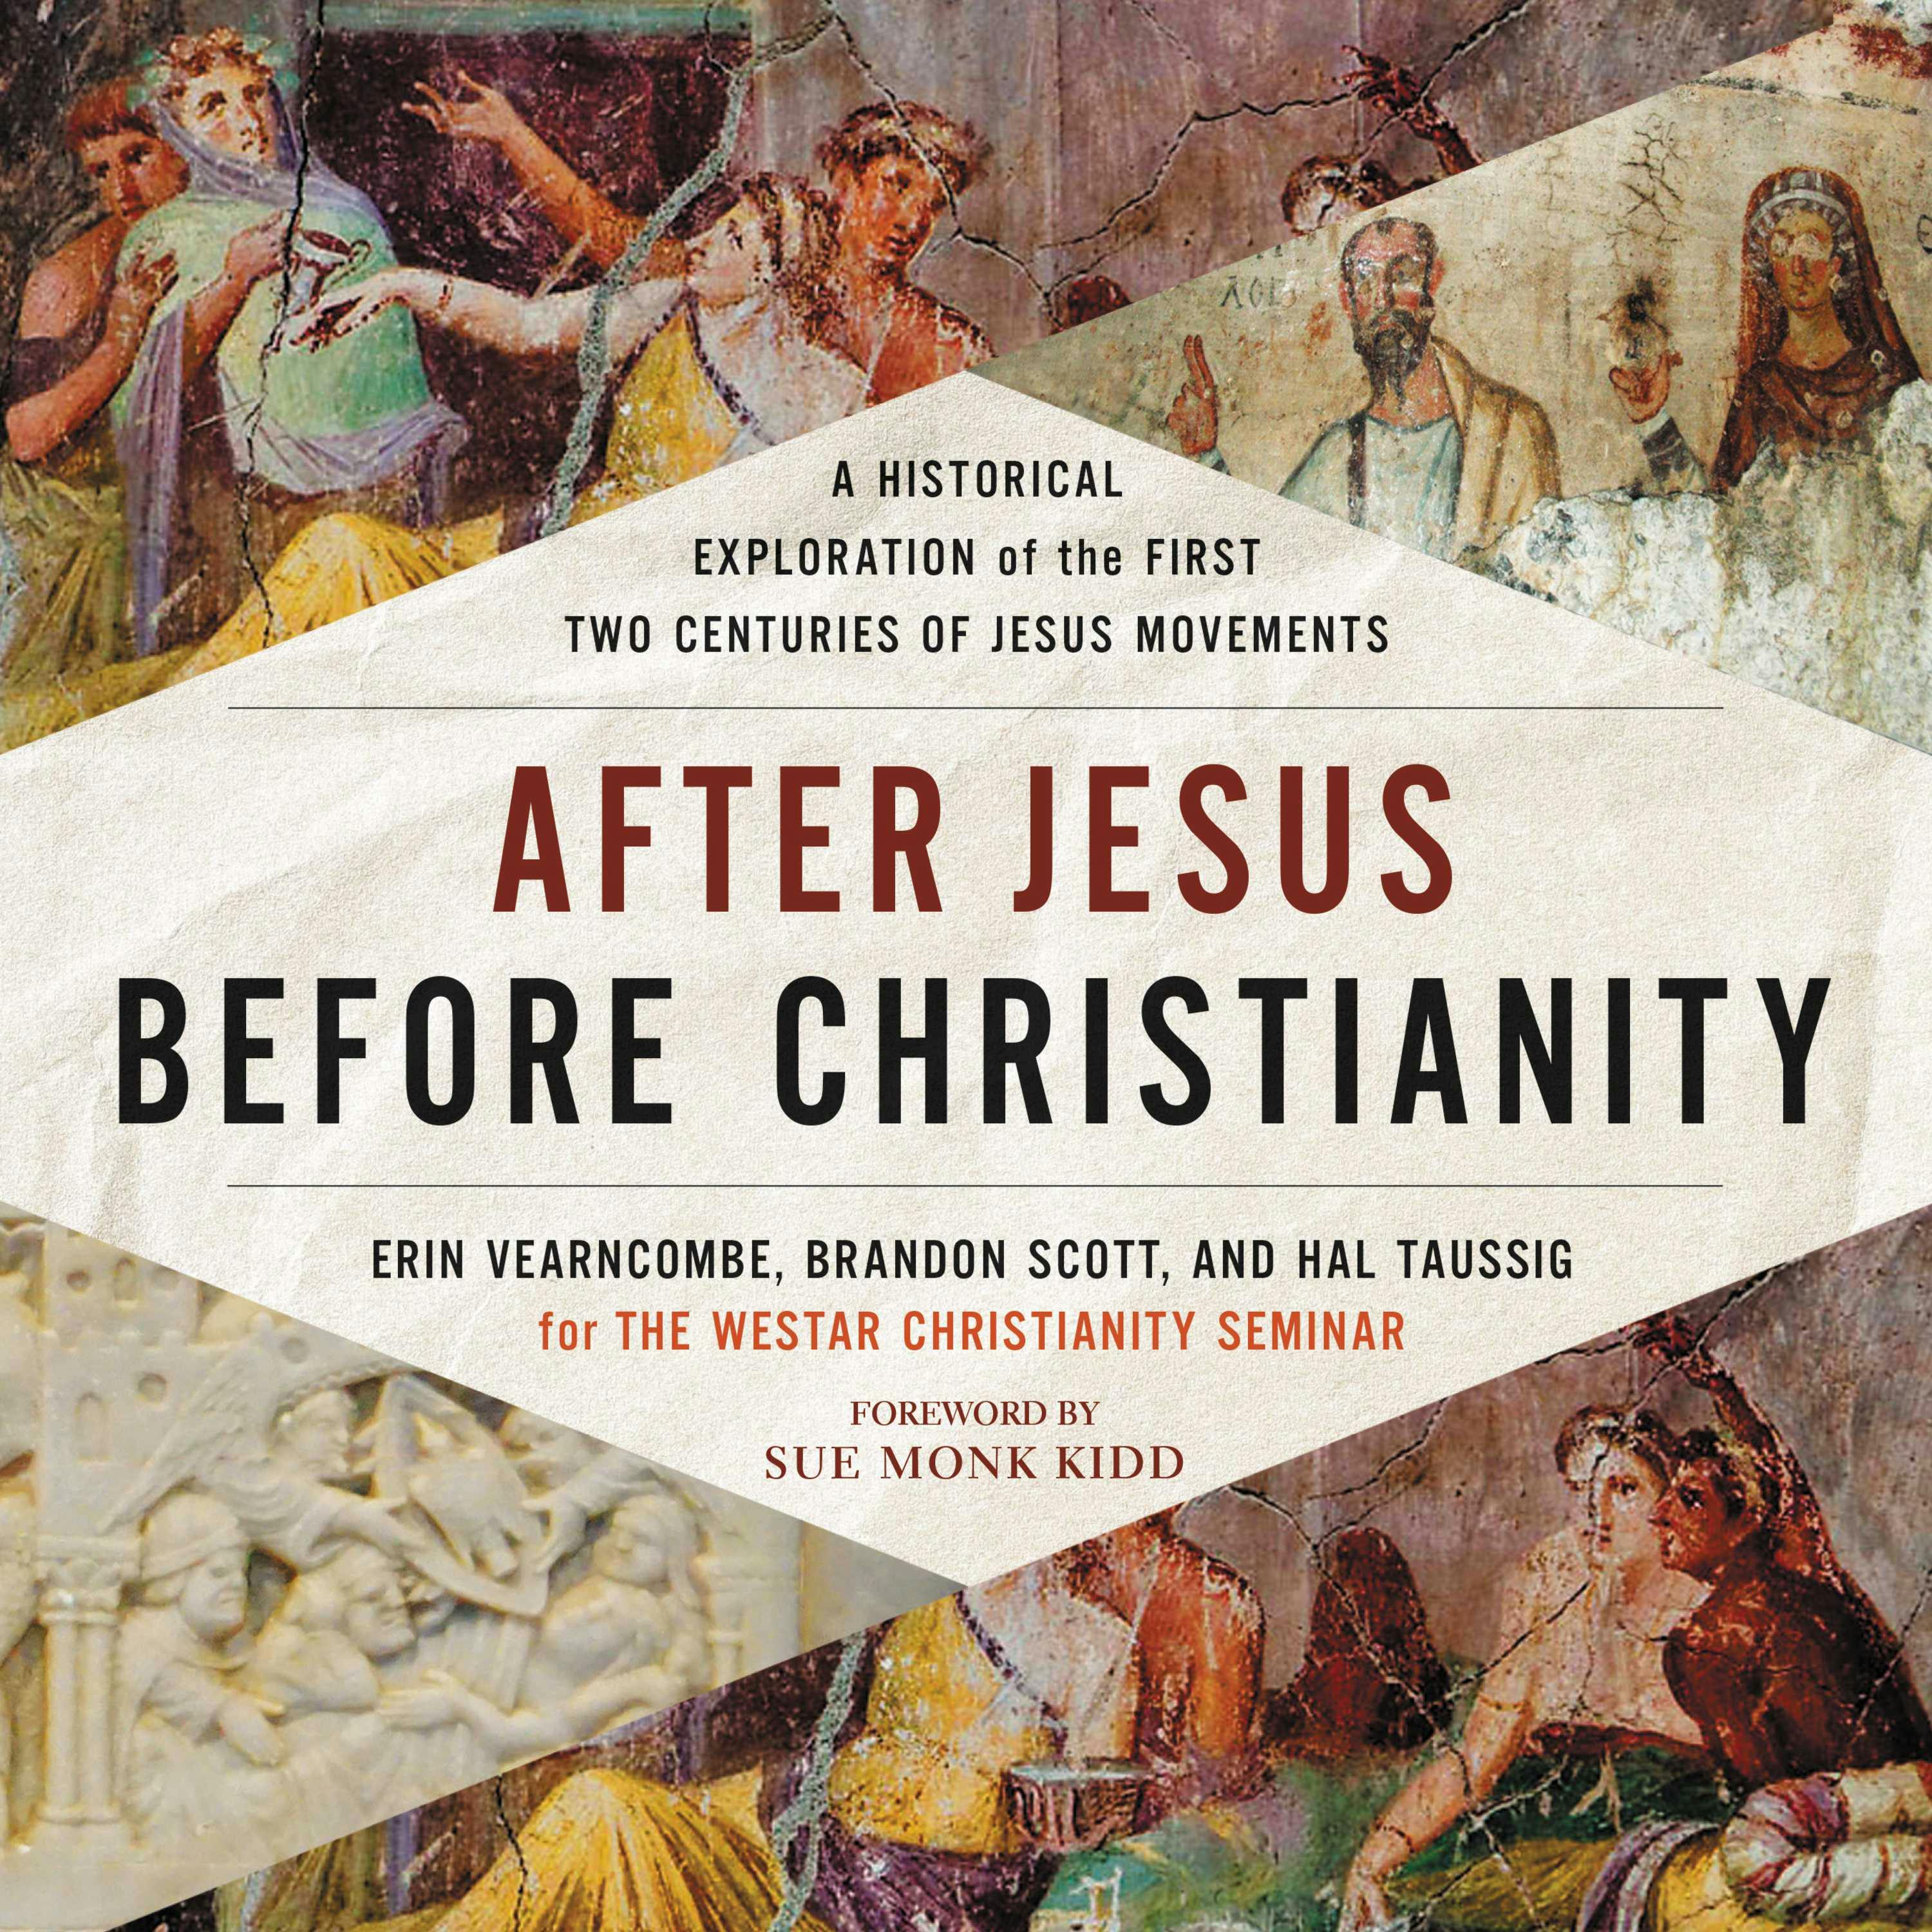 After Jesus Before Christianity: A Historical Exploration of the First Two Centuries of Jesus Movements - The Westar Institute, Erin Vearncombe, Brandon Scott, Hal Taussig